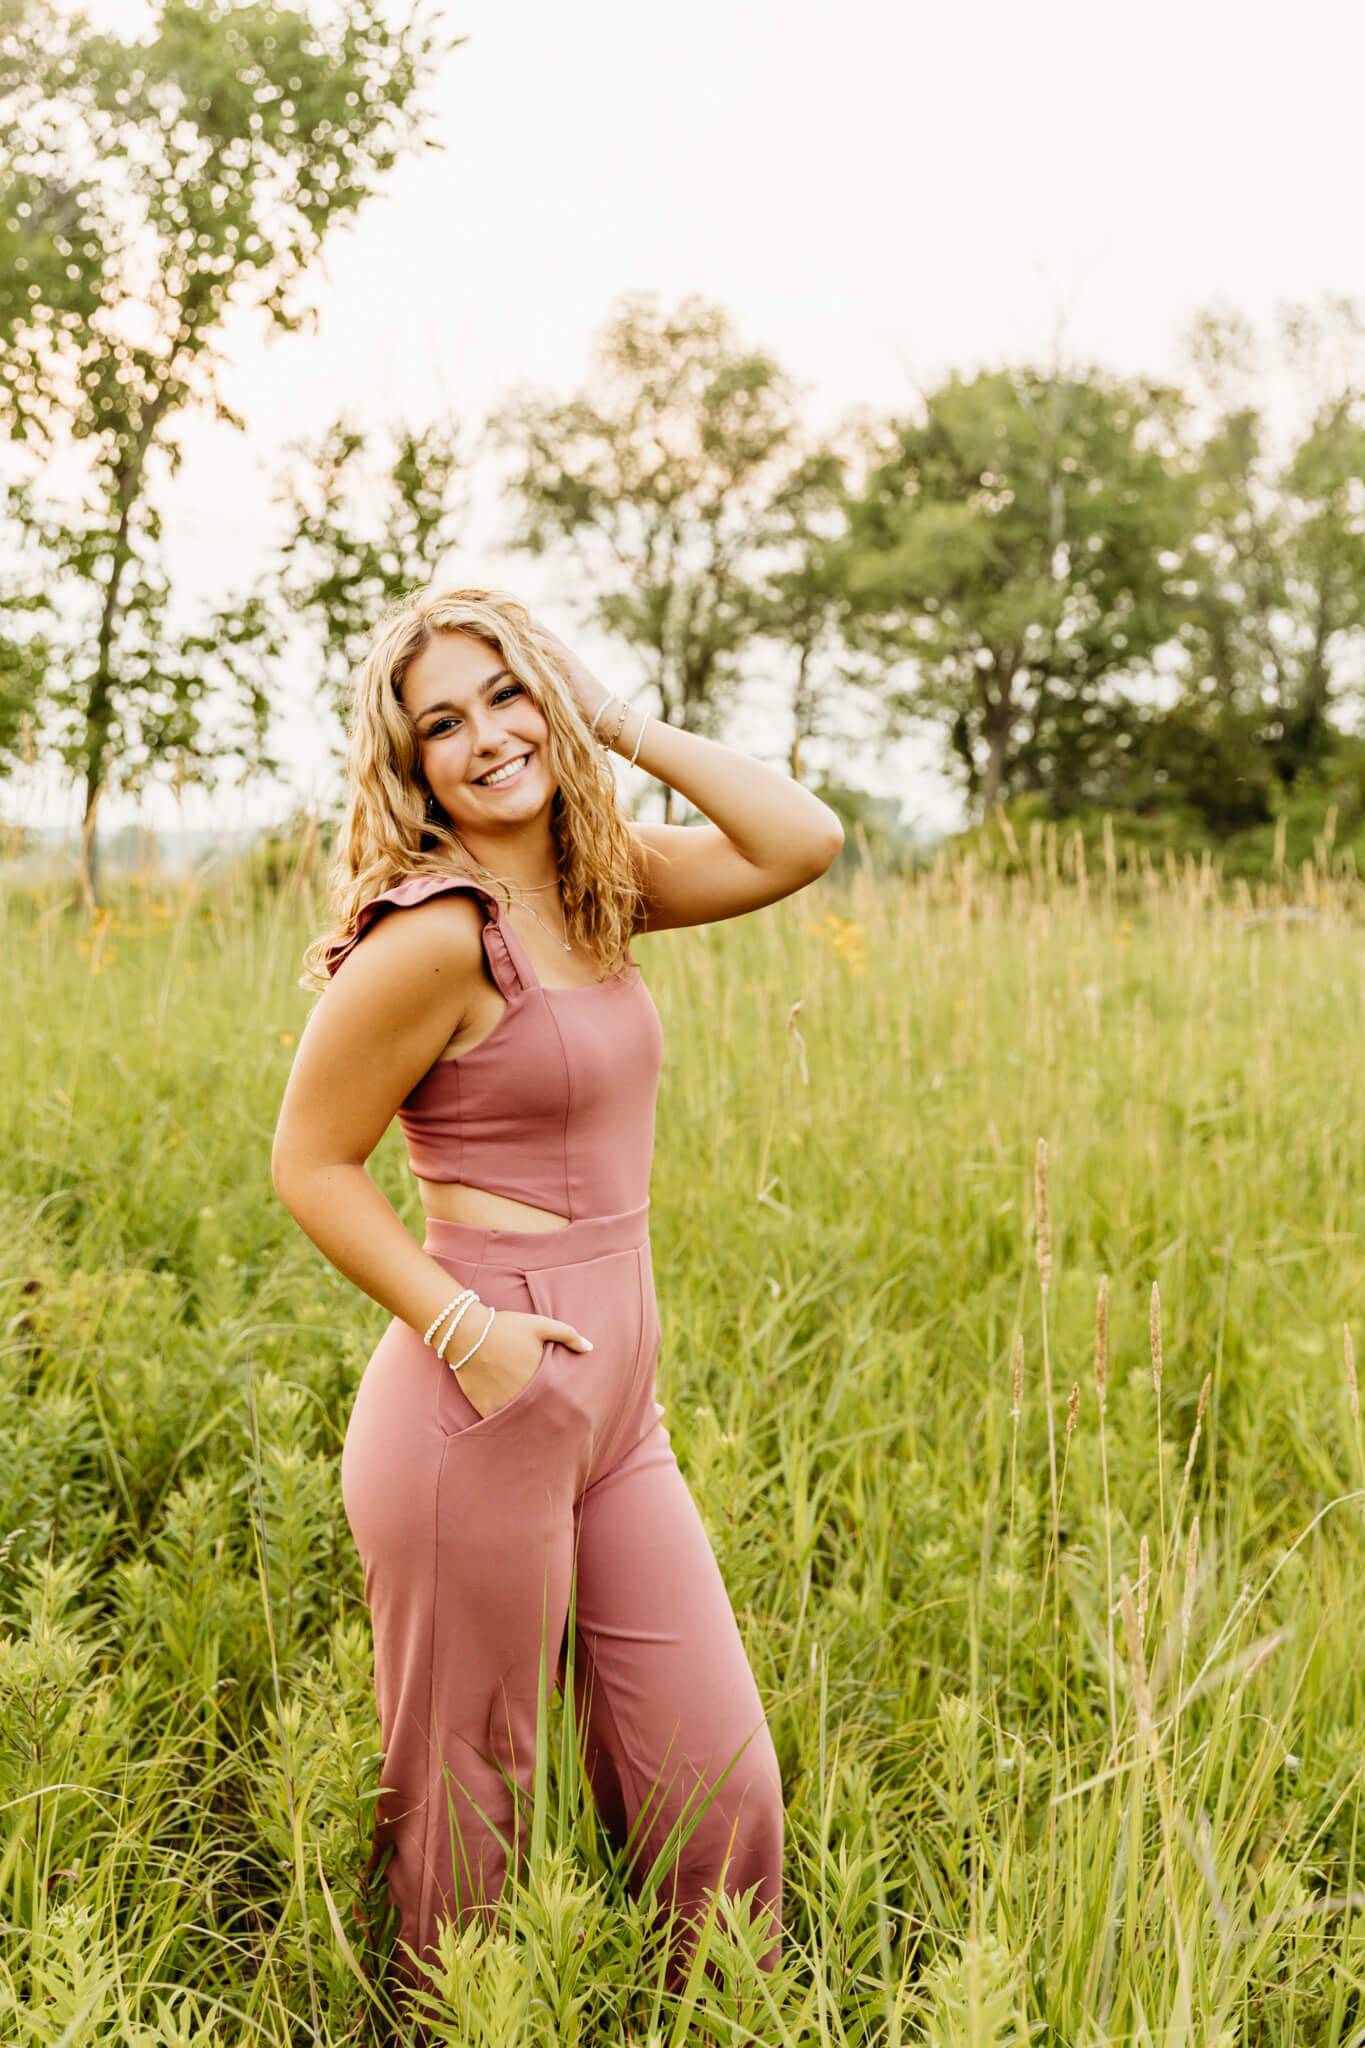 beautiful high school girl in a pink jumpsuit standing in a grassy field